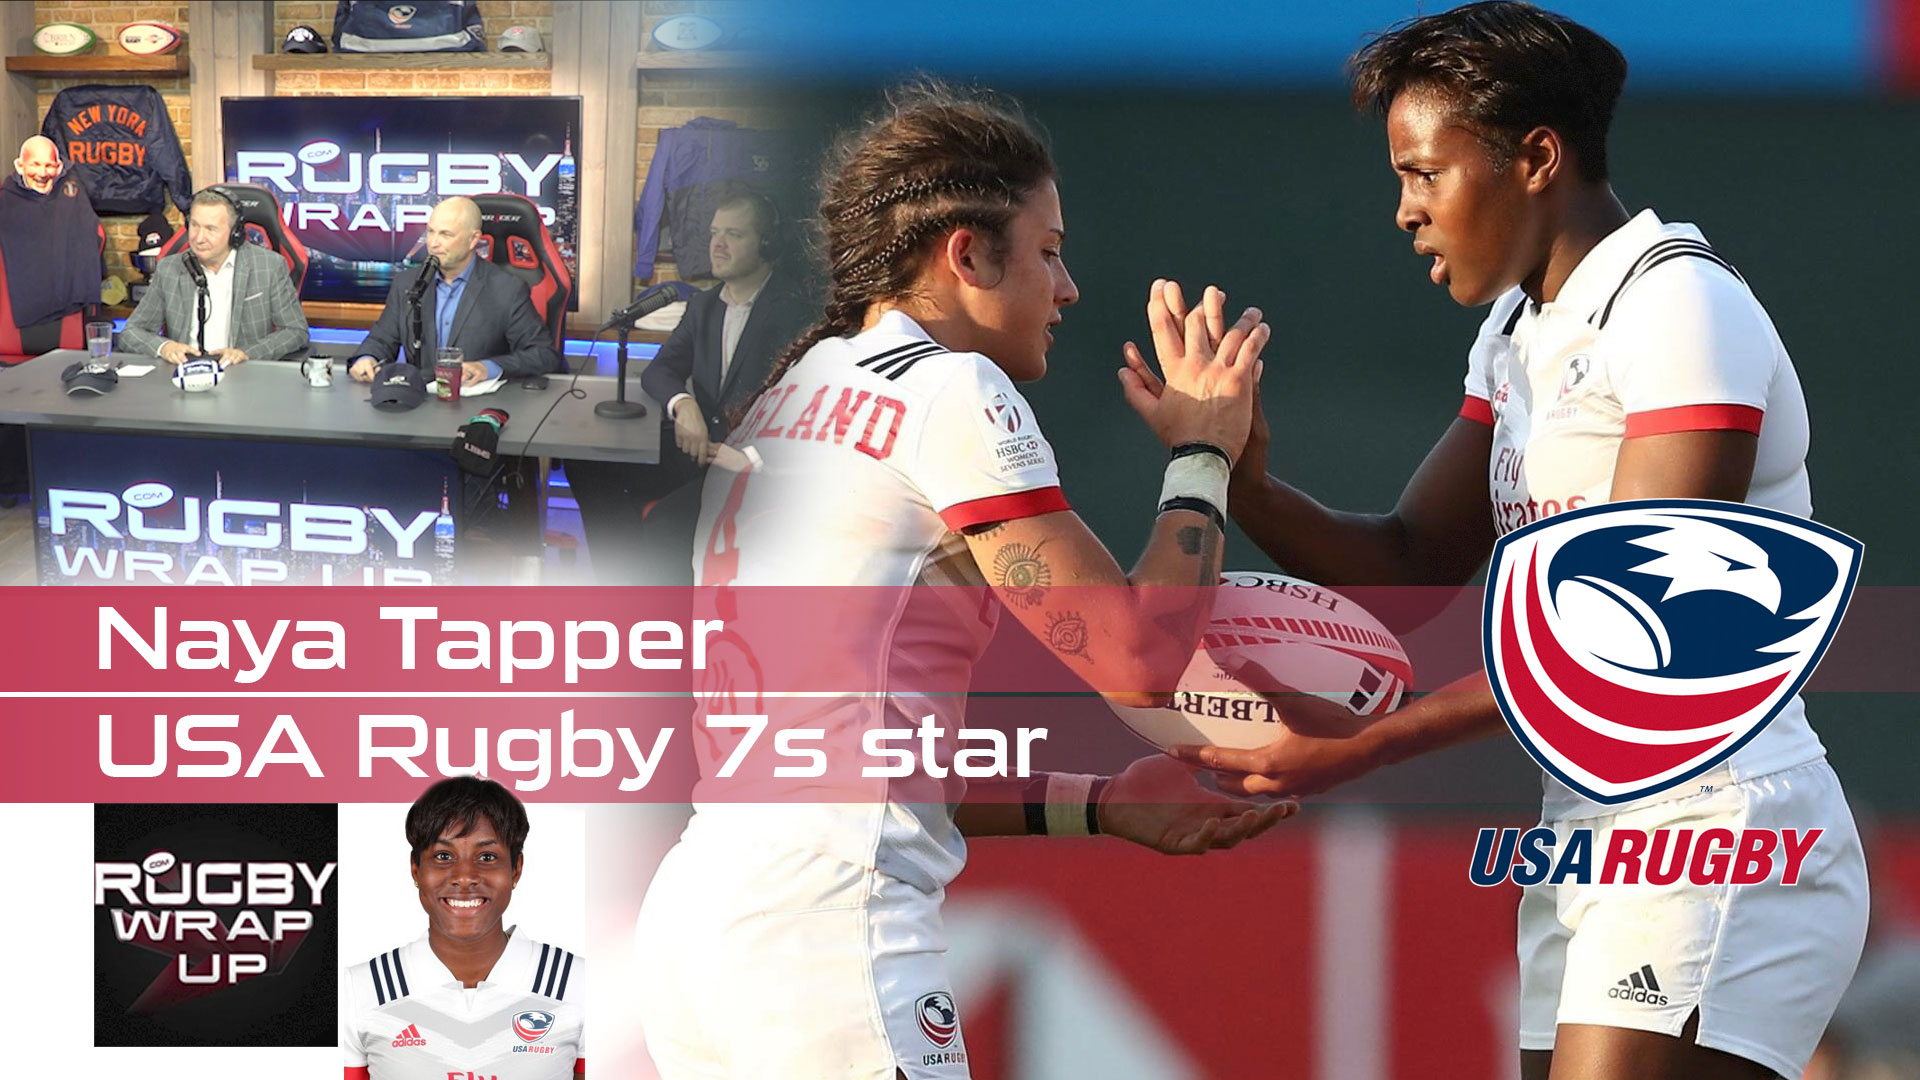 Naya-Tapper-USA-Rugby-Rugby_Wrap_Up